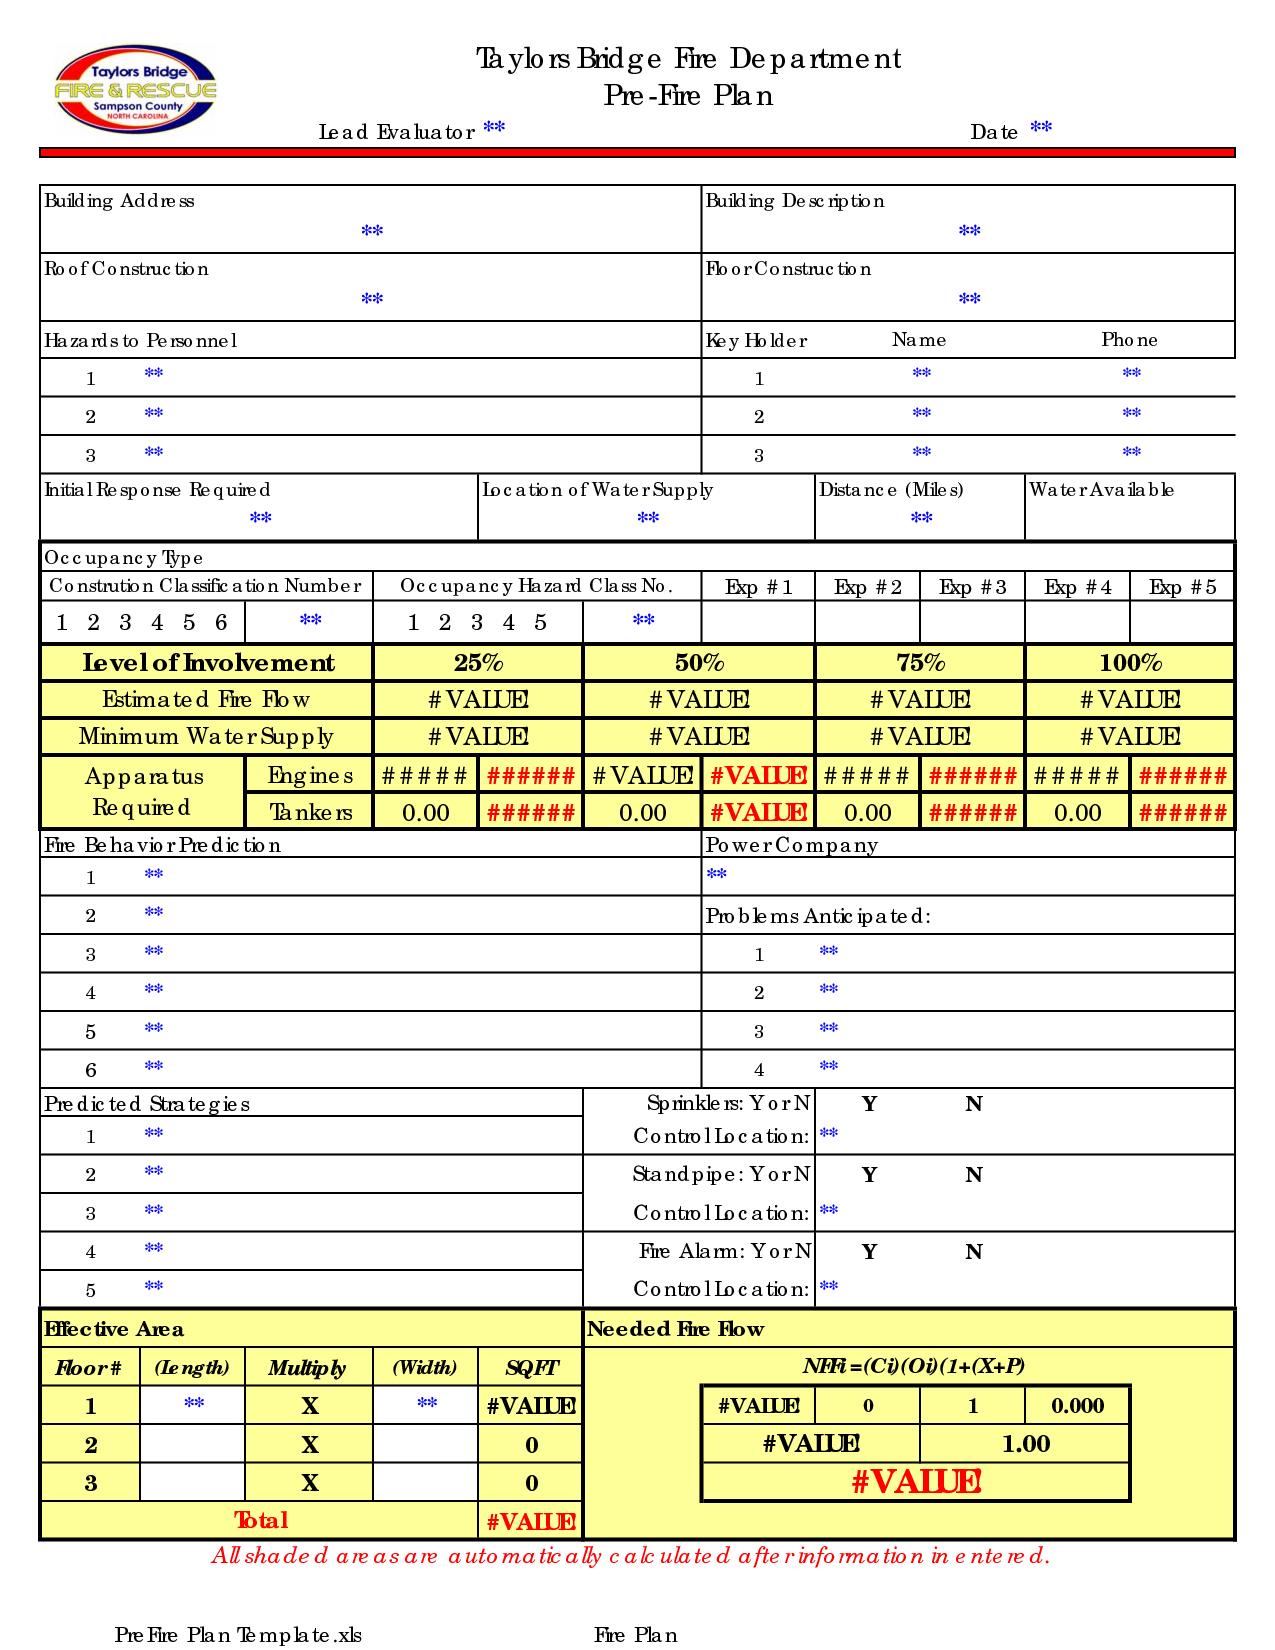 002 Fire Department Pre Plan Template 458668  Tinypetition Also Fire Department Pre Plan Worksheet